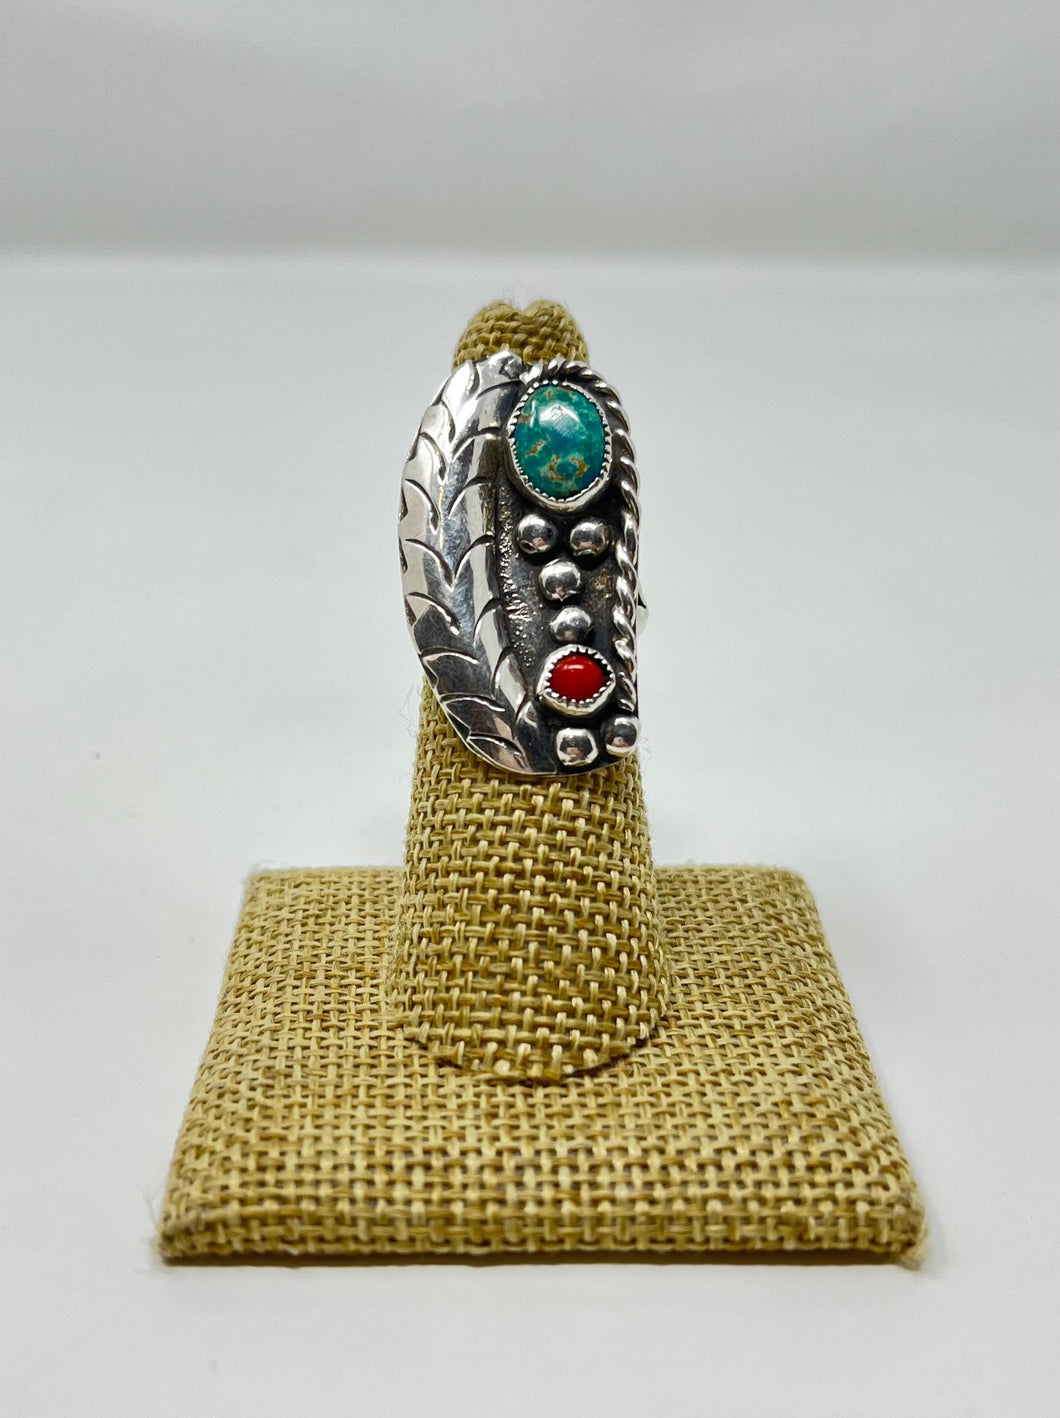 Sterling Silver Turquoise & Coral Ring